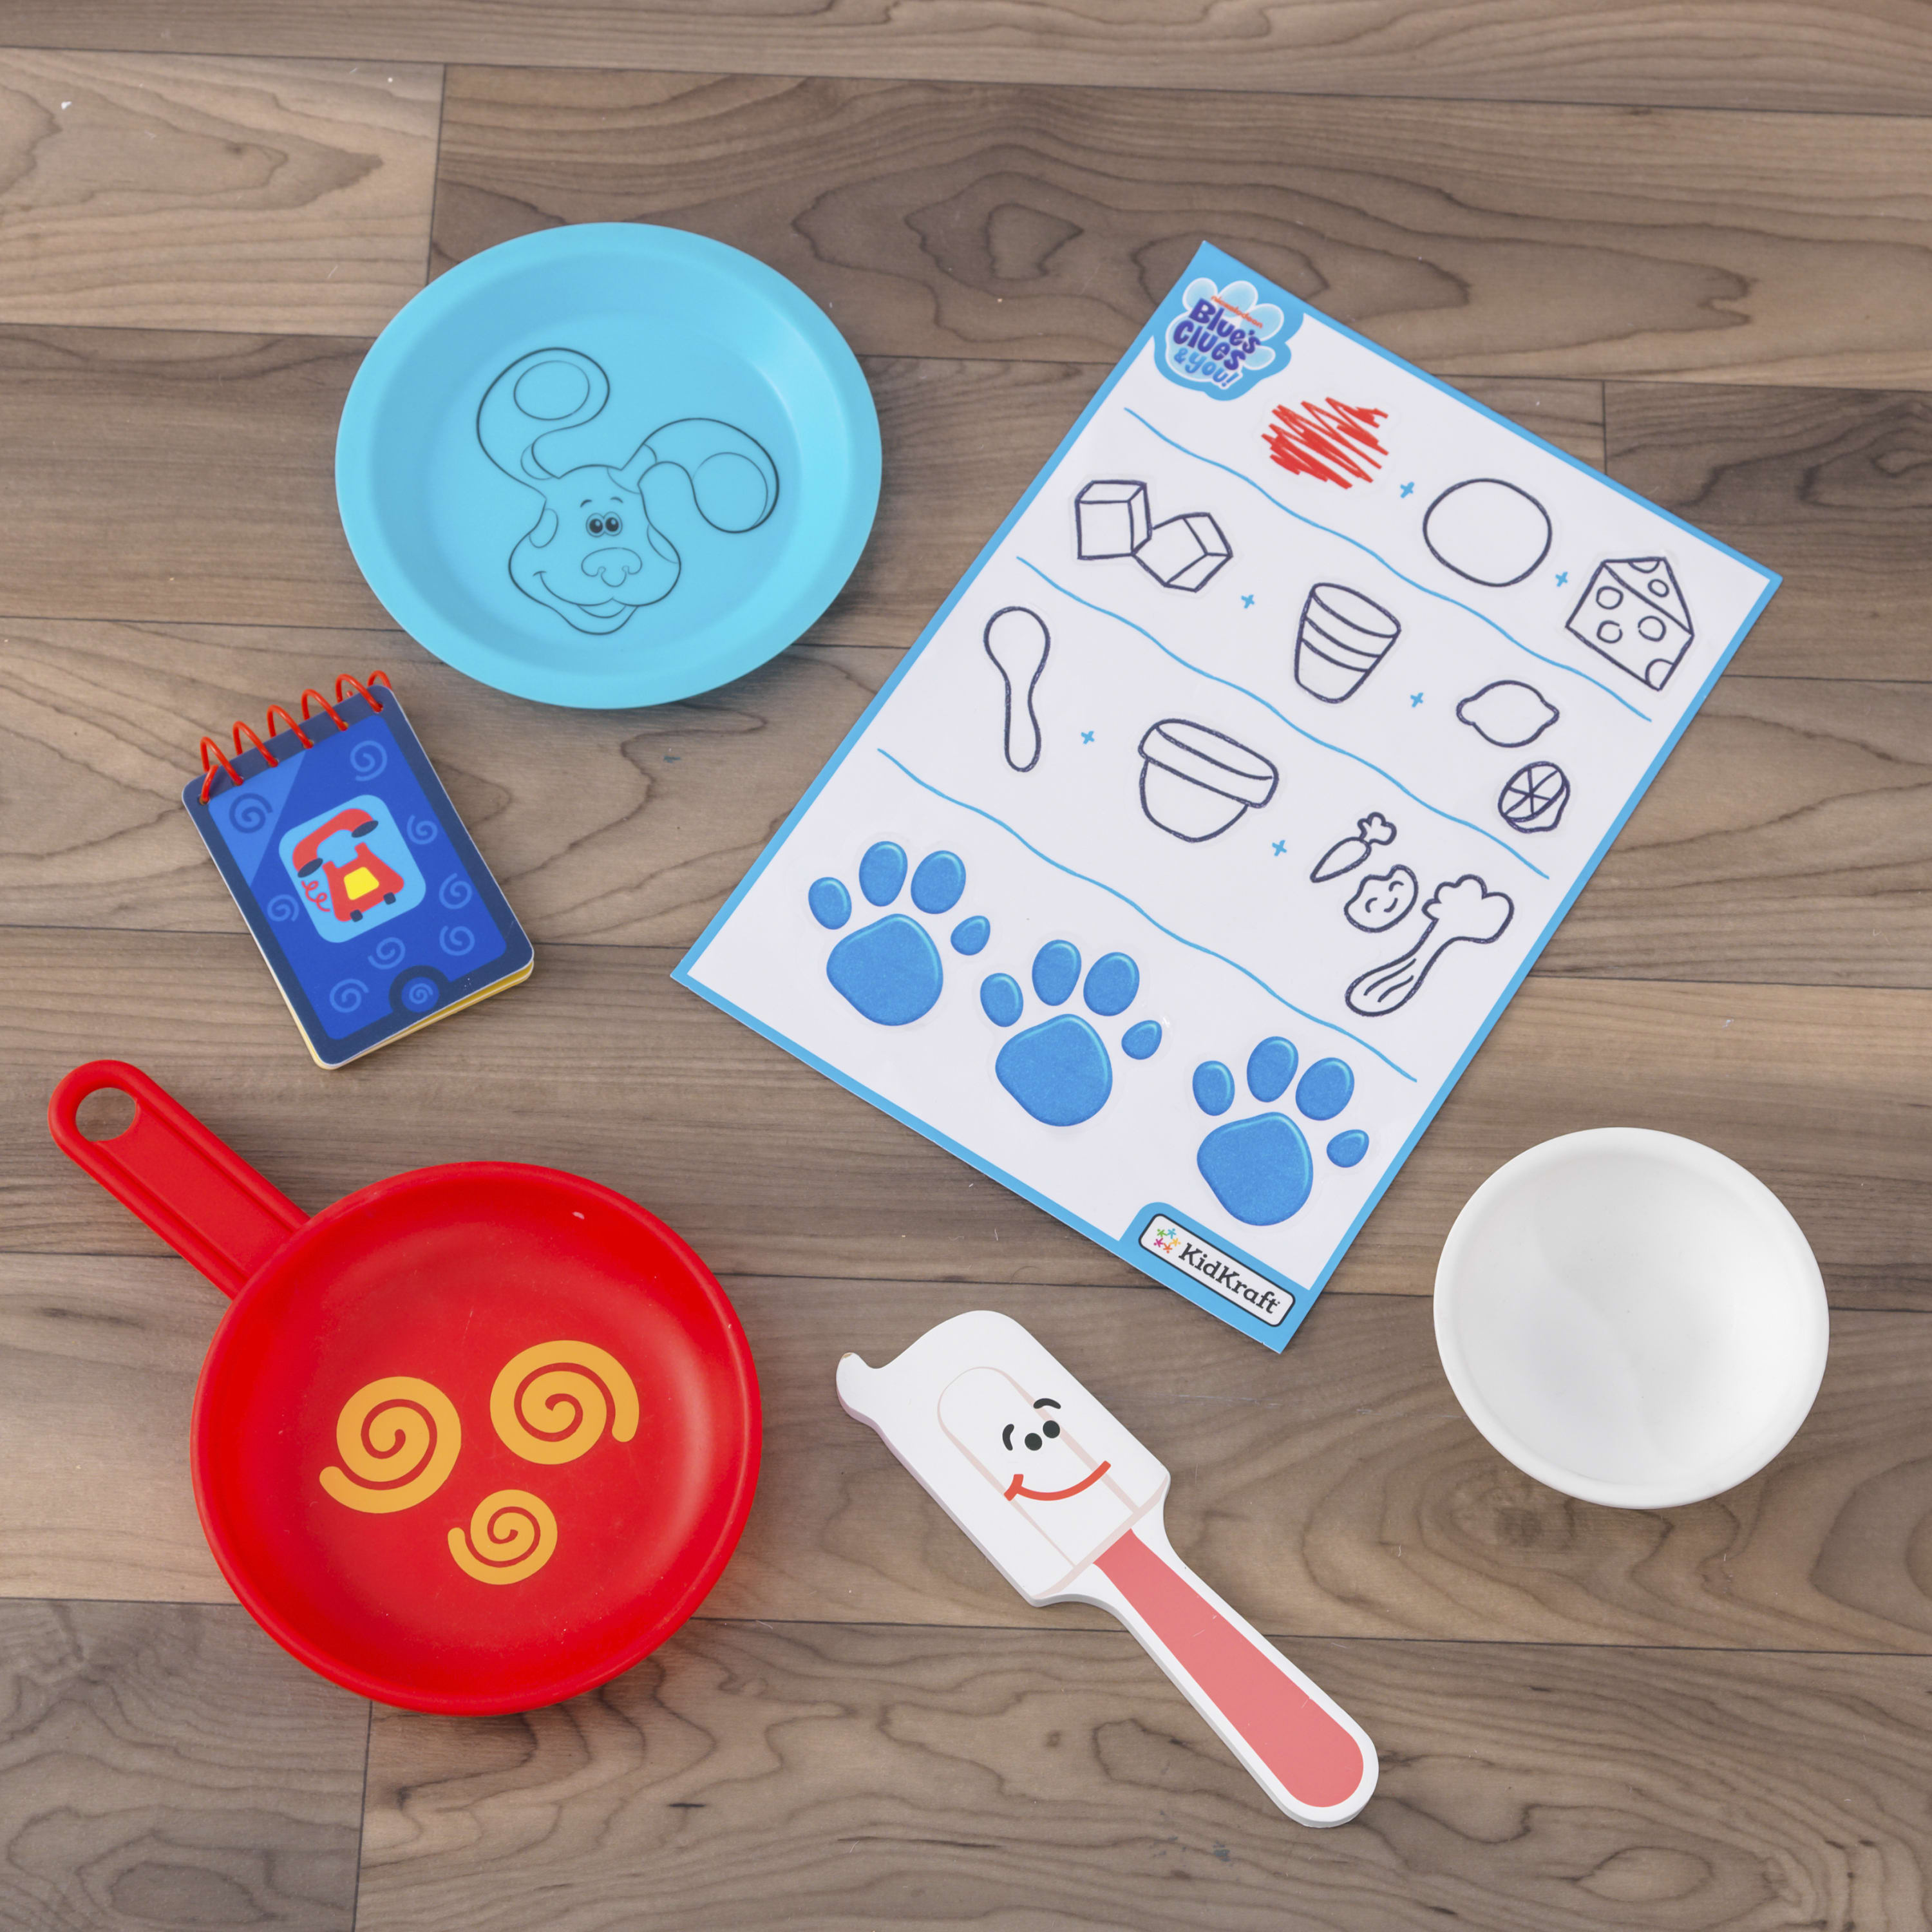 KidKraft Blue's Clues & You! Cooking-Up-Clues Wooden Play Kitchen & Handy Dandy Notebook - image 5 of 8